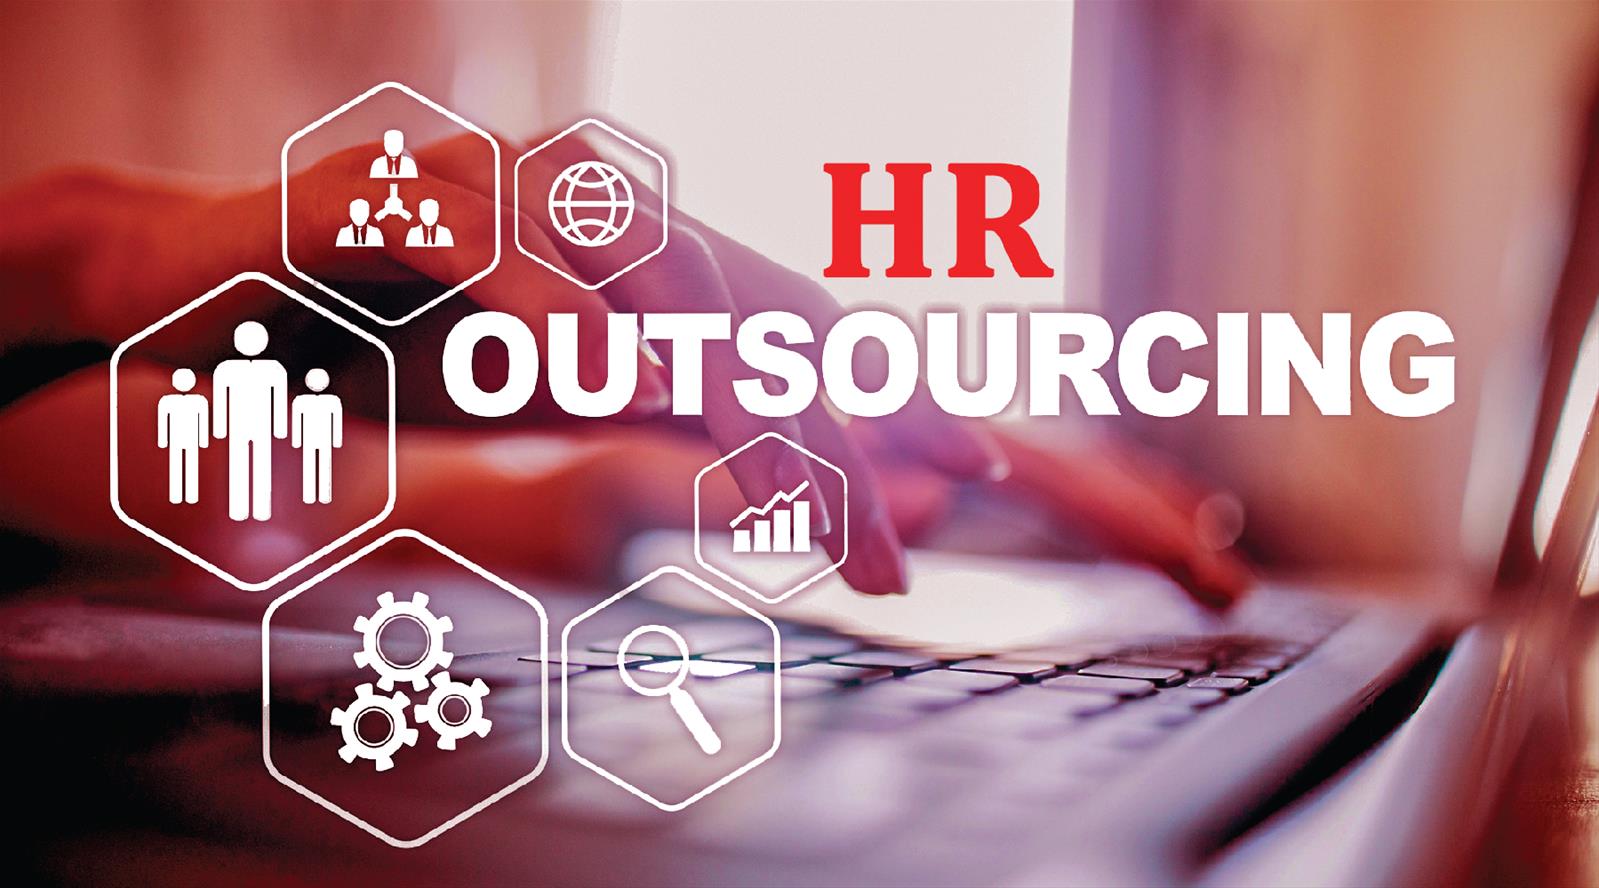 4 common forms of HR outsourcing today